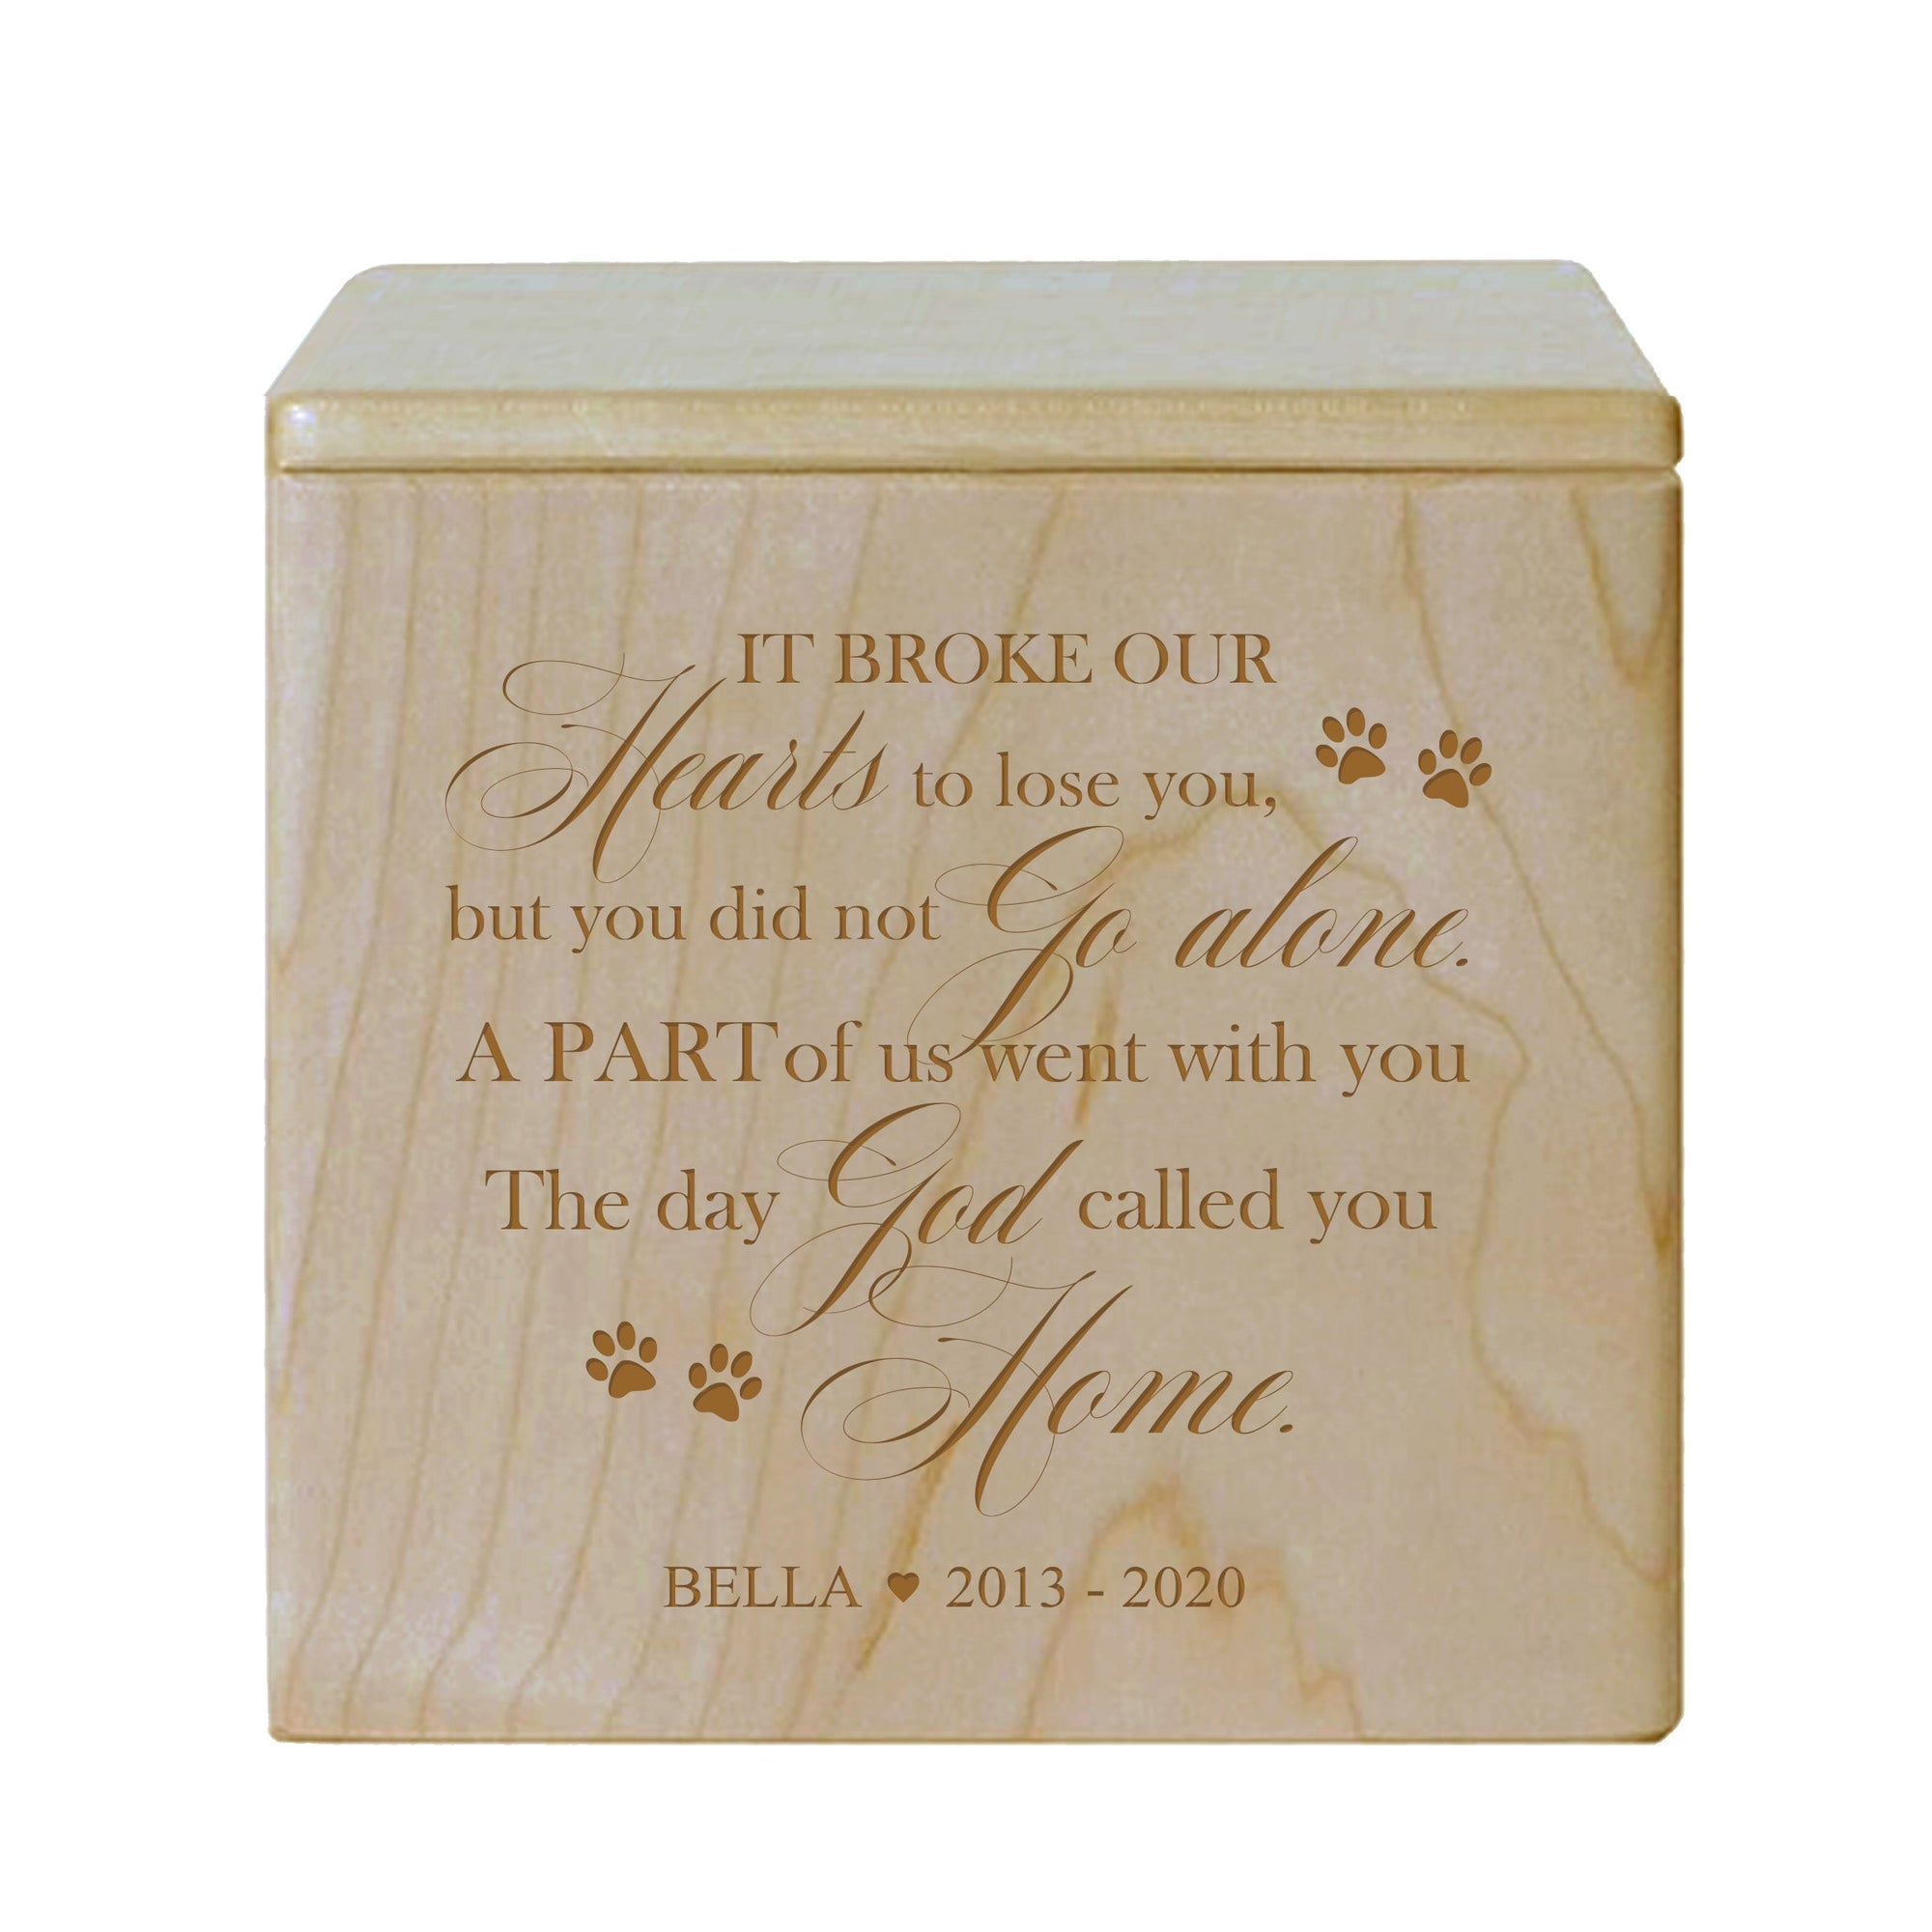 Pet Memorial Keepsake Cremation Urn Box for Dog or Cat - It Broke Our Hearts To Lose You